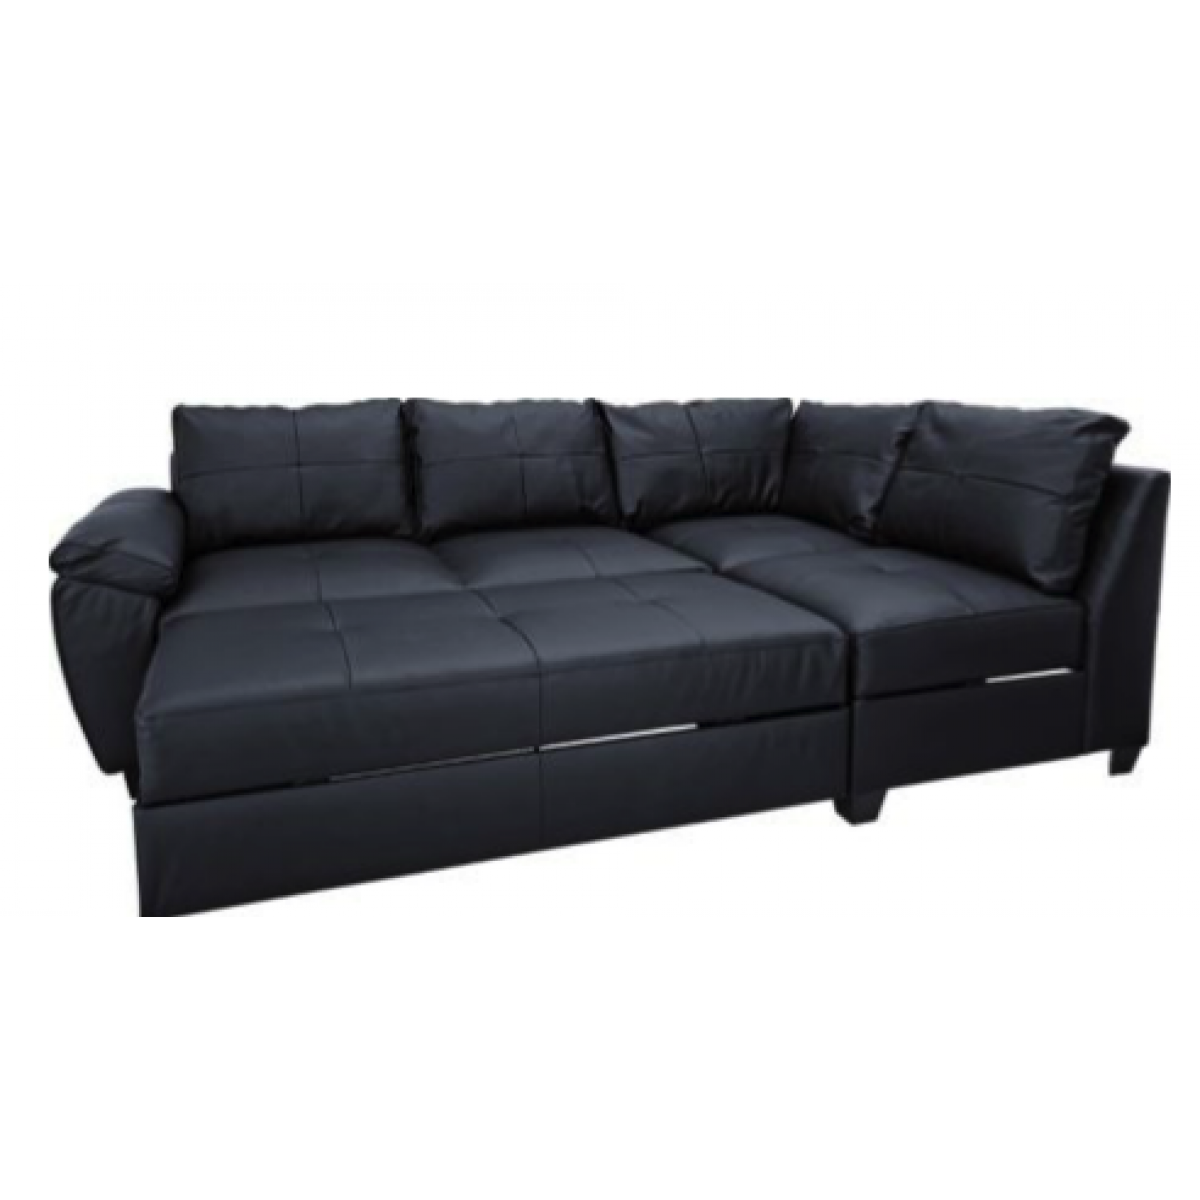 Images of Fernando Leather Right Hand Sofa Bed Corner Group - Black. black leather corner sofa bed